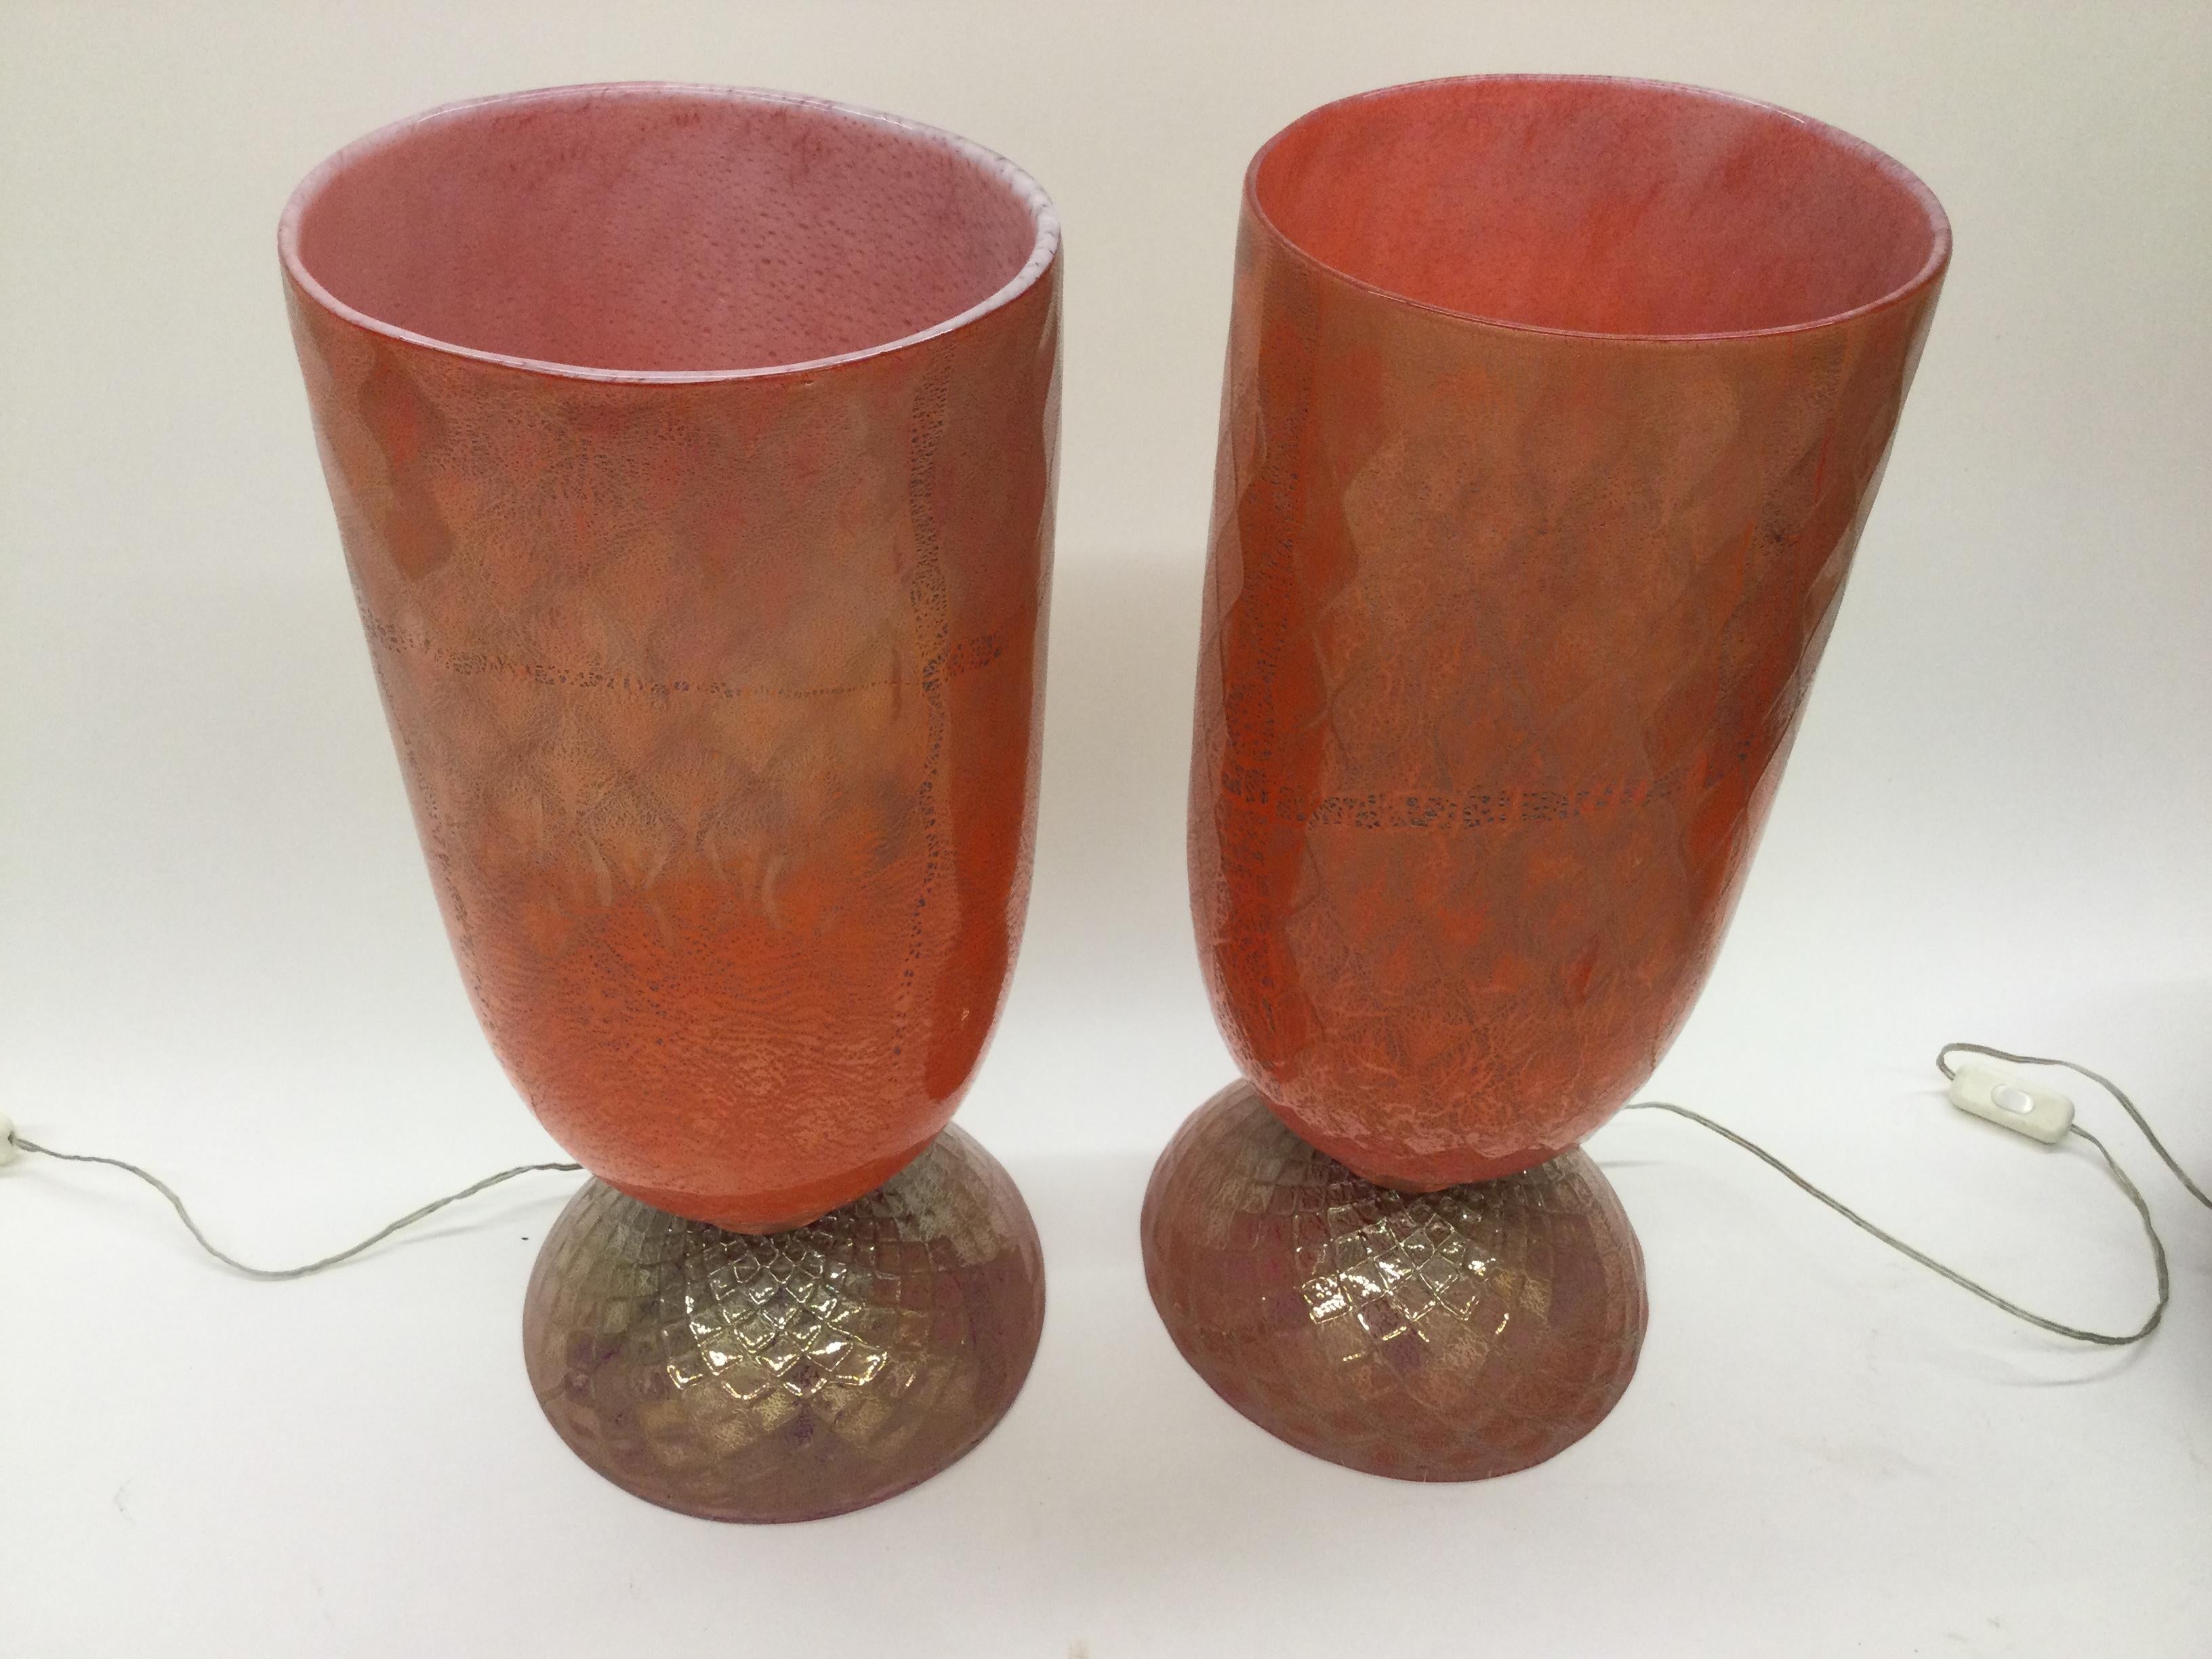 Amazing pair of Murano urn form lamps in vibrant red with silver foil decoration. Waffled design in the glass makes these lamps very rare and desirable.